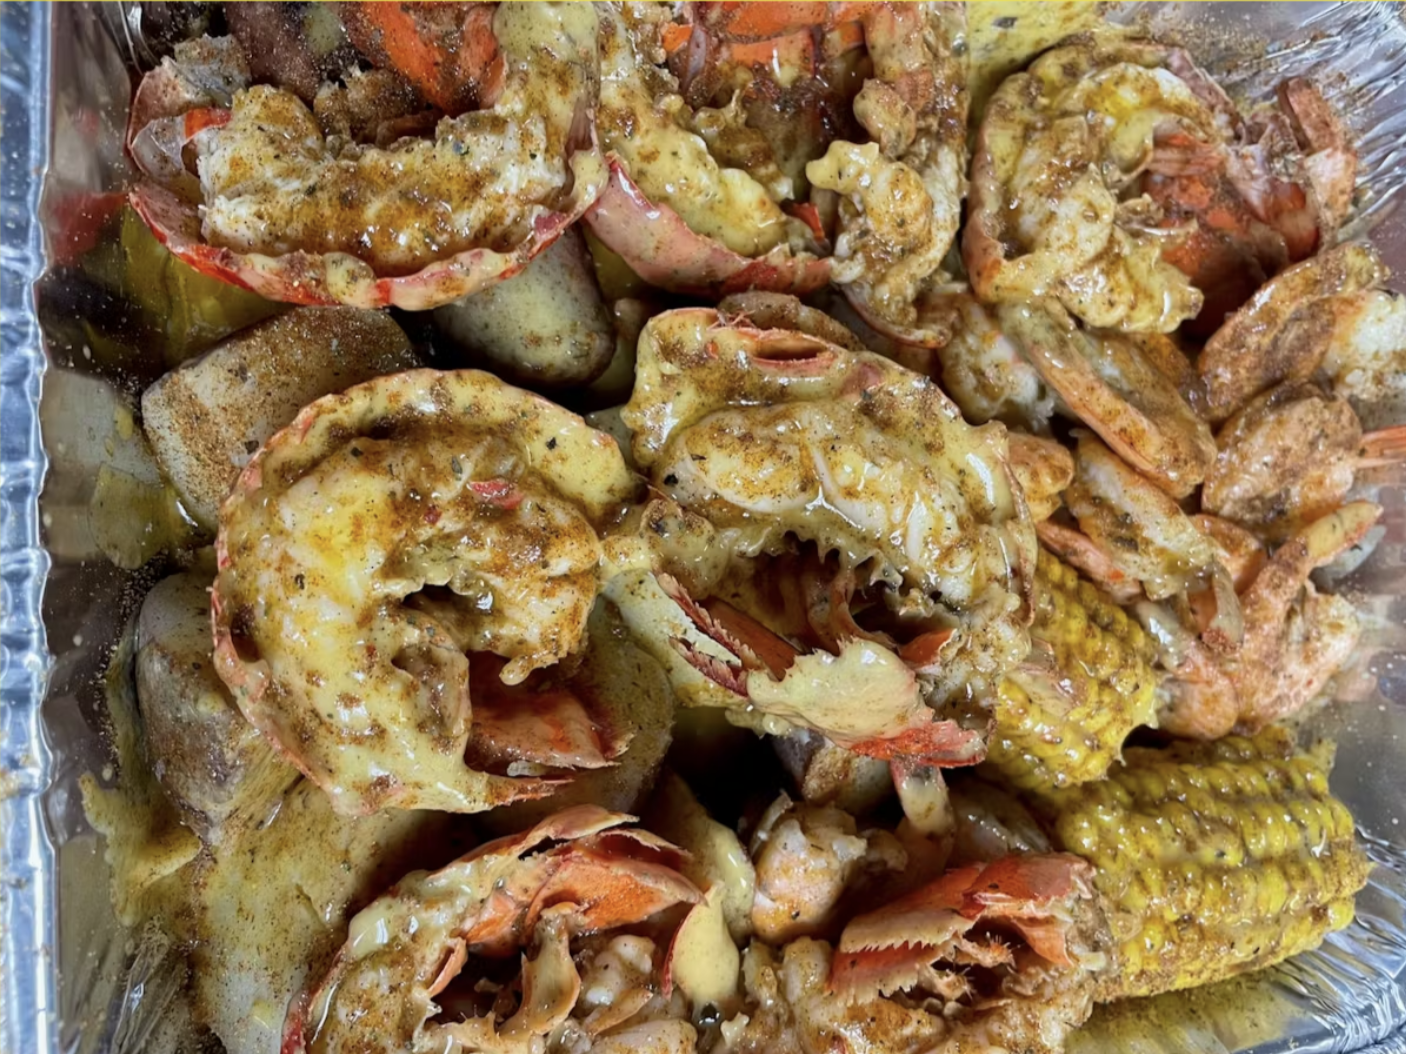 A tray of seasoned seafood including lobsters, shrimp, and corn on the cob, all covered in spices, perfect for late night bites.